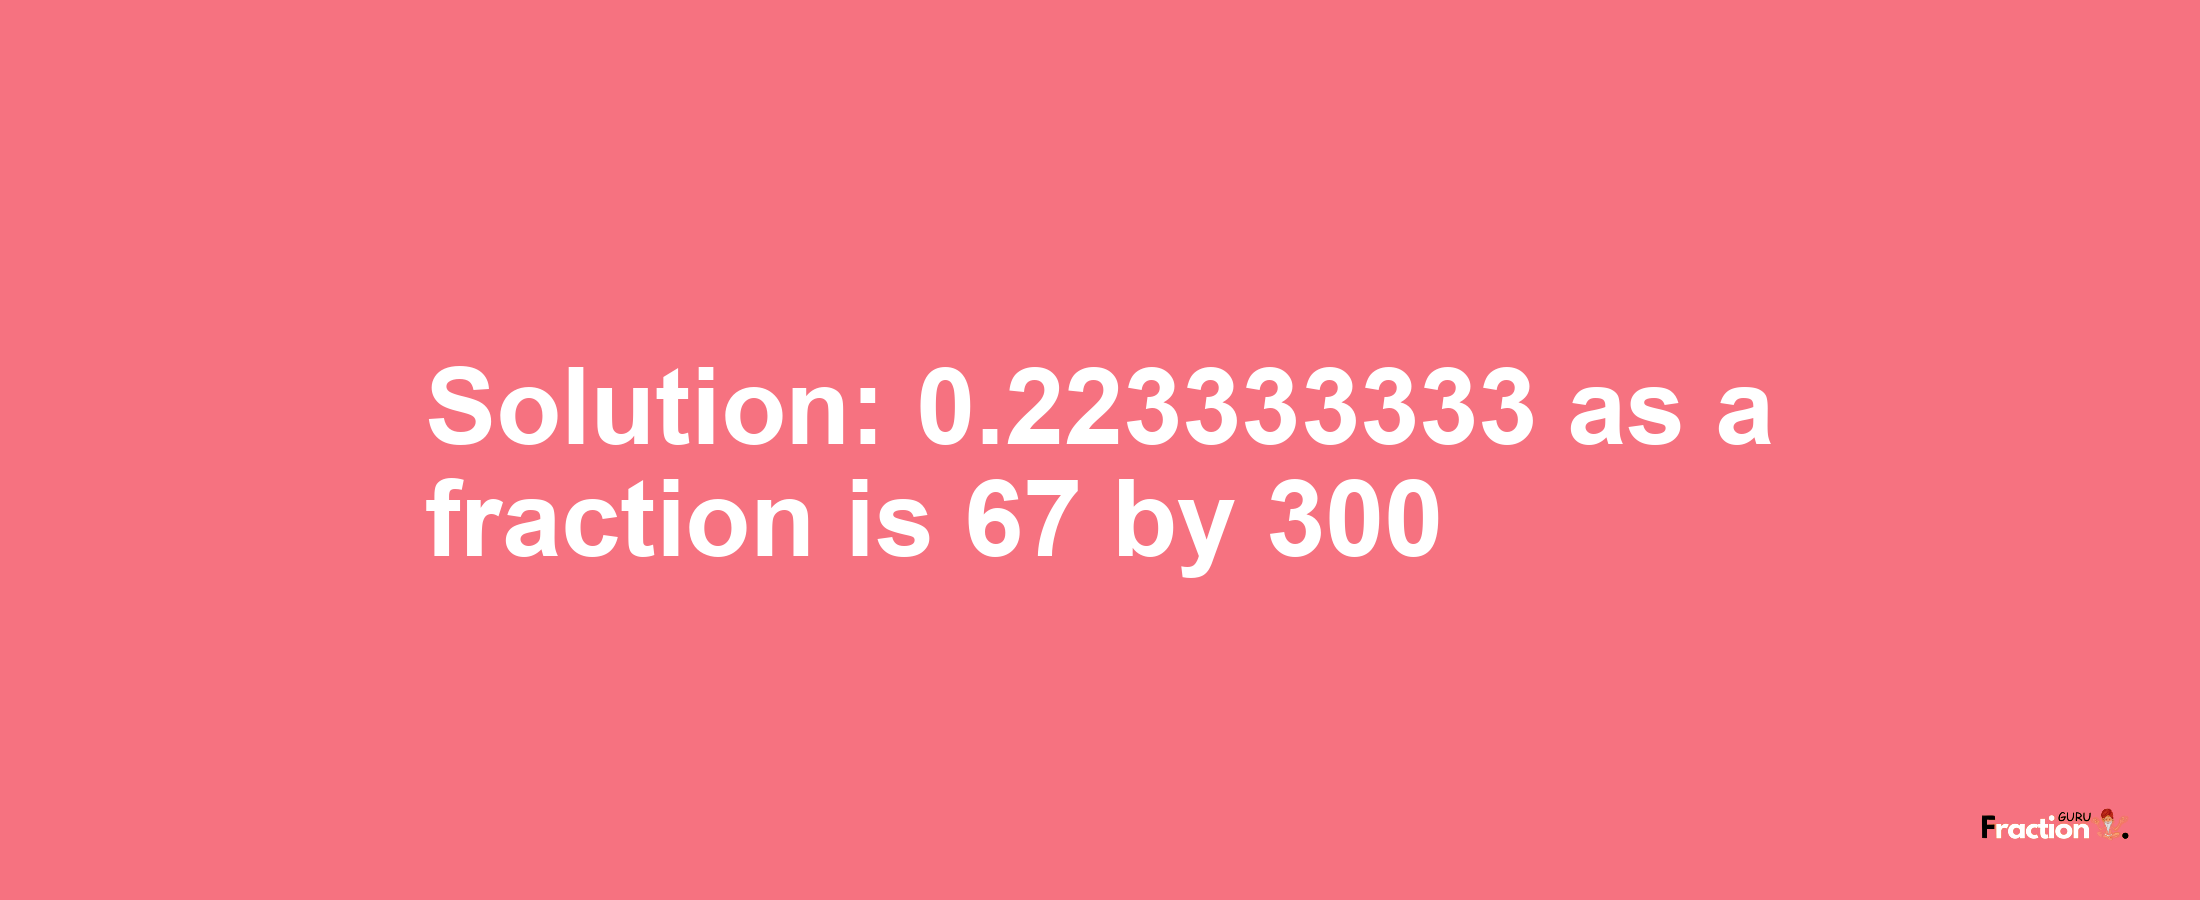 Solution:0.223333333 as a fraction is 67/300